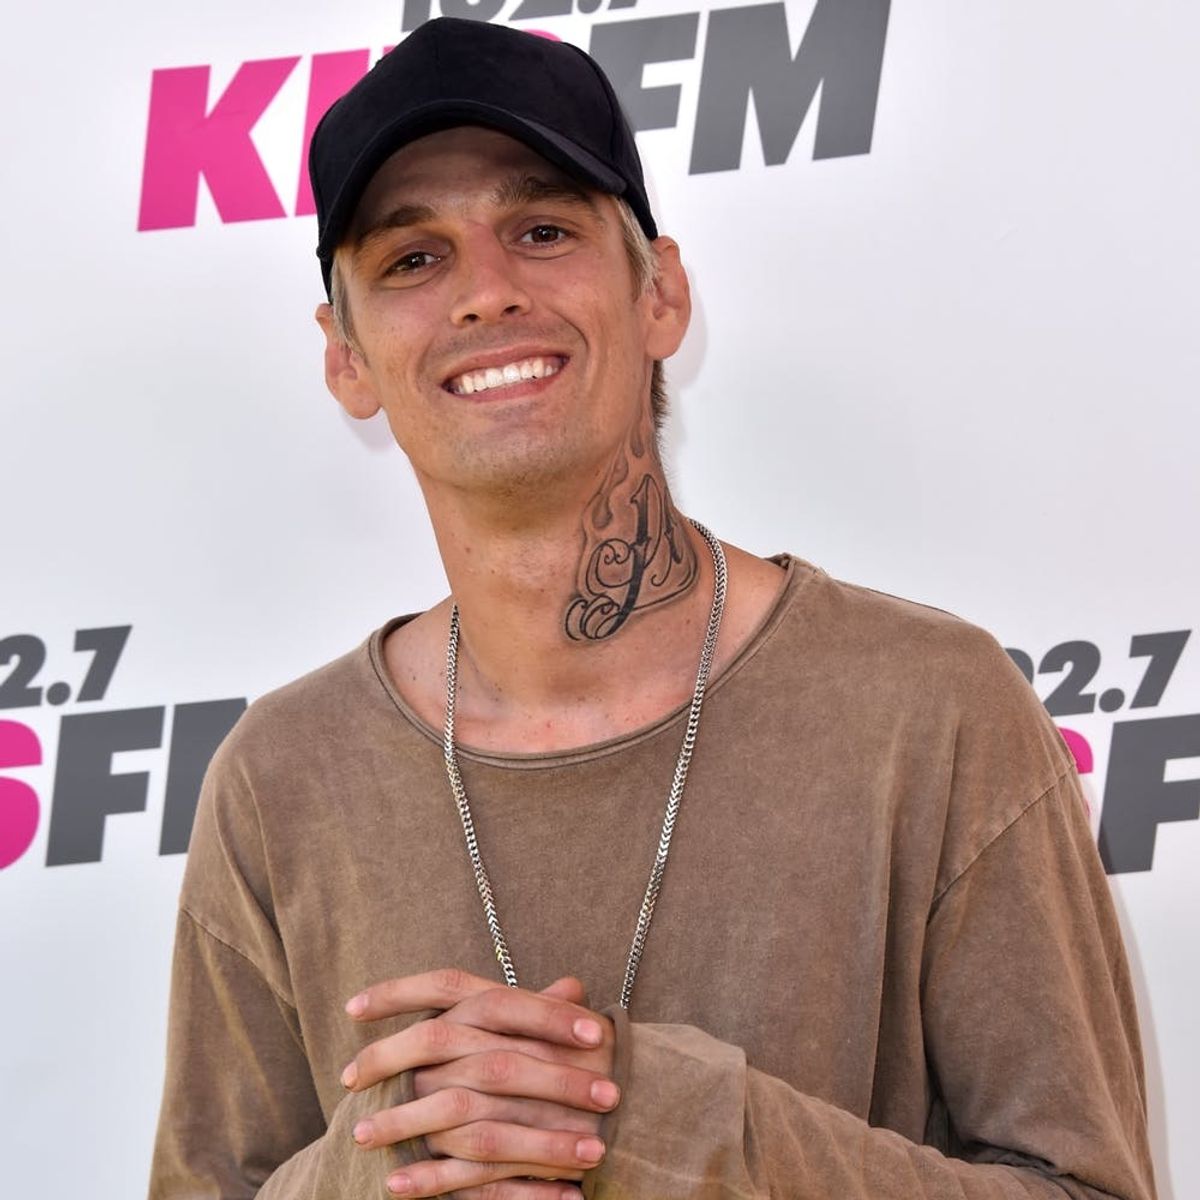 Aaron Carter Pens Heartfelt Twitter Note About His Sexuality